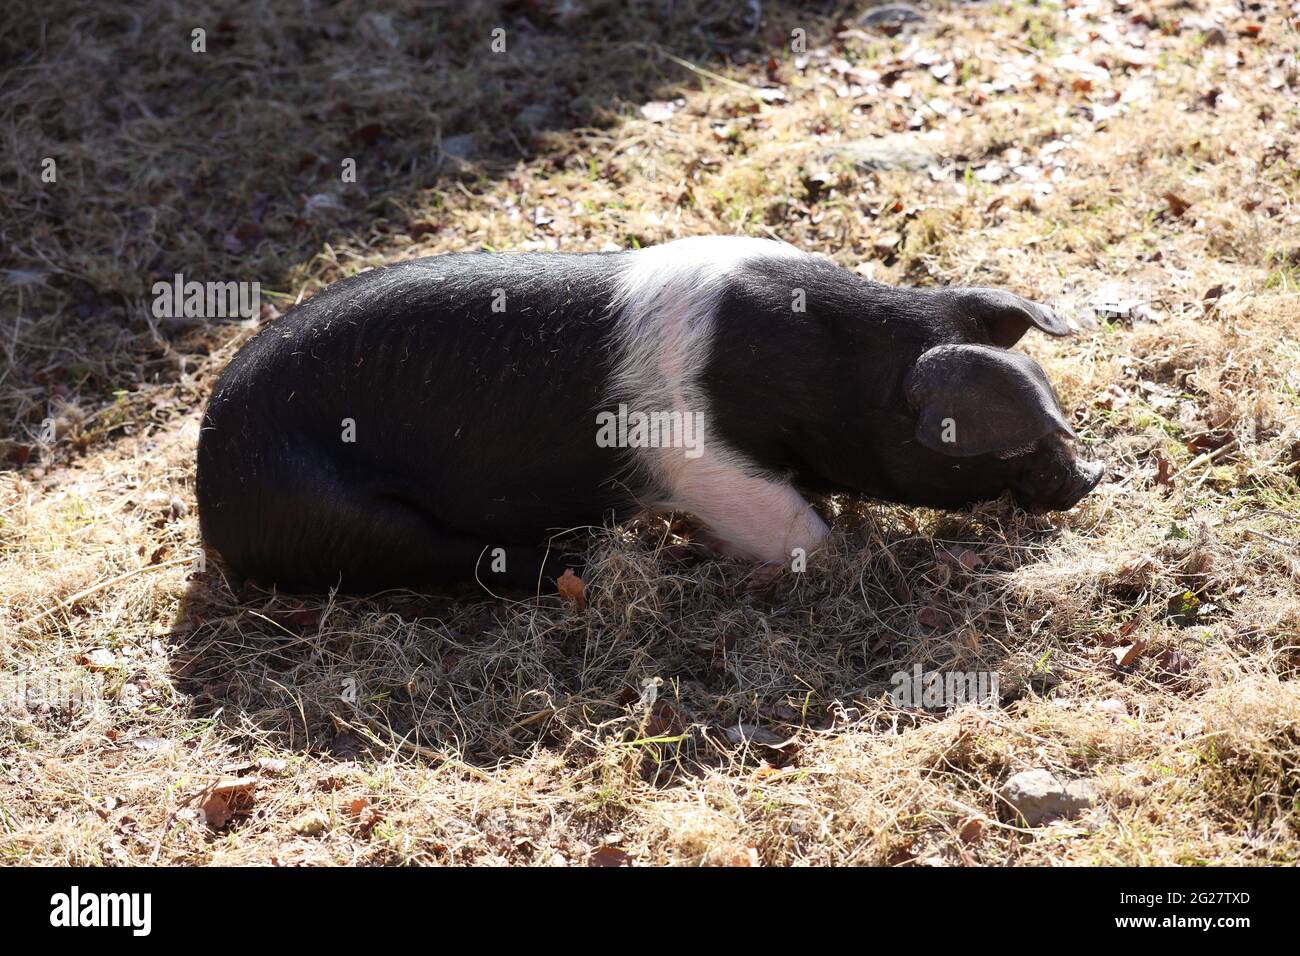 Pigs pictured at the Weald & Downland Living Museum in Singleton, Chichester, West Sussex, UK. Stock Photo